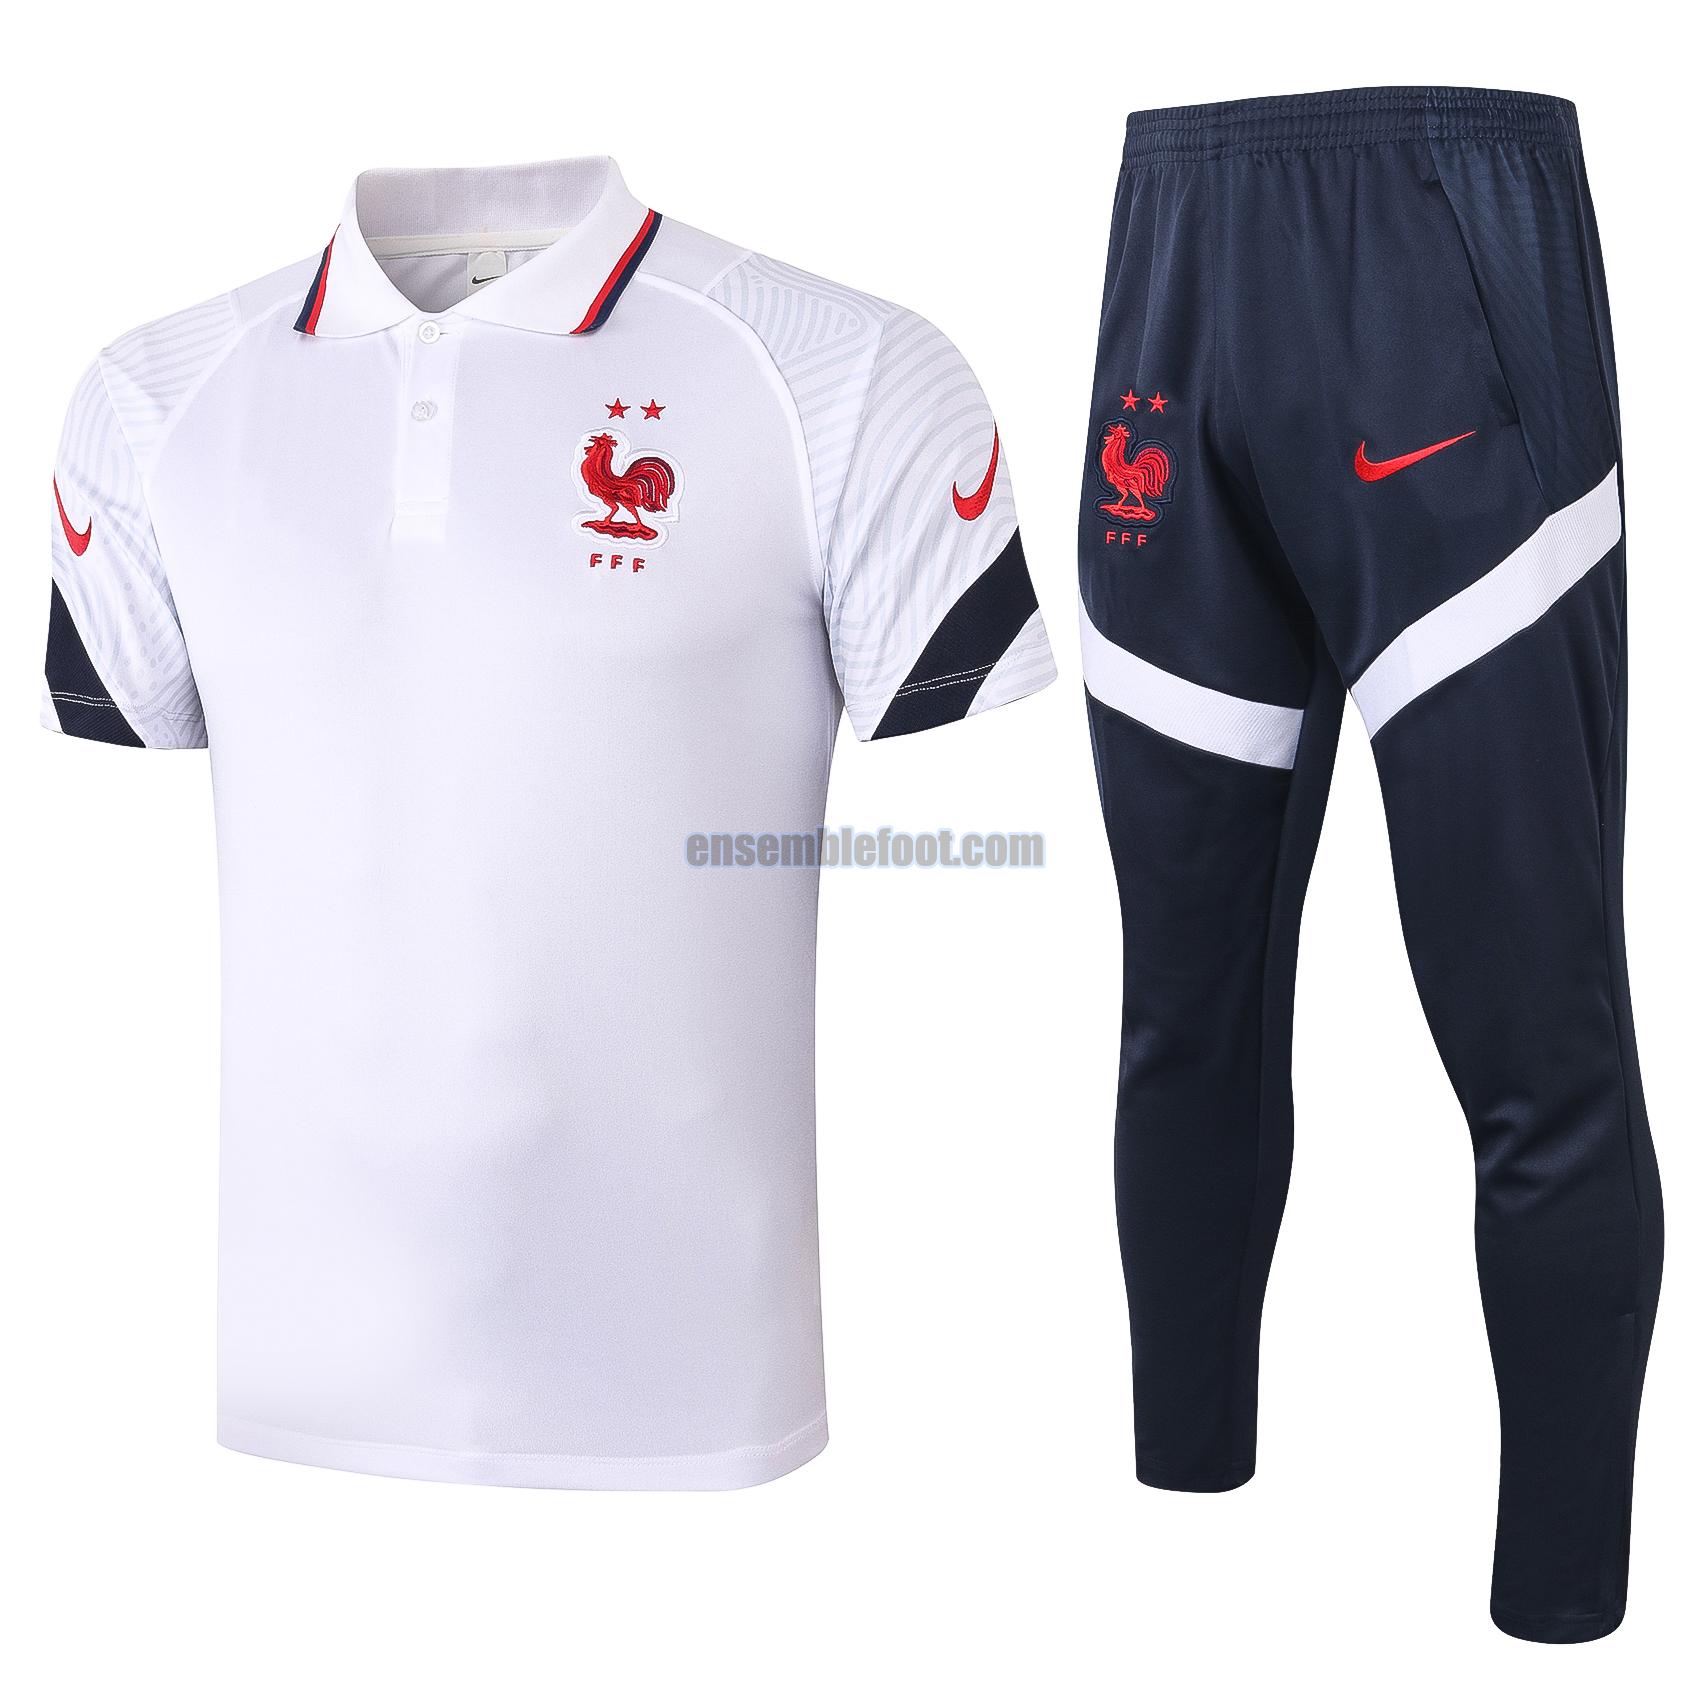 maillots de foot polo france 2020-2021 blanc costume